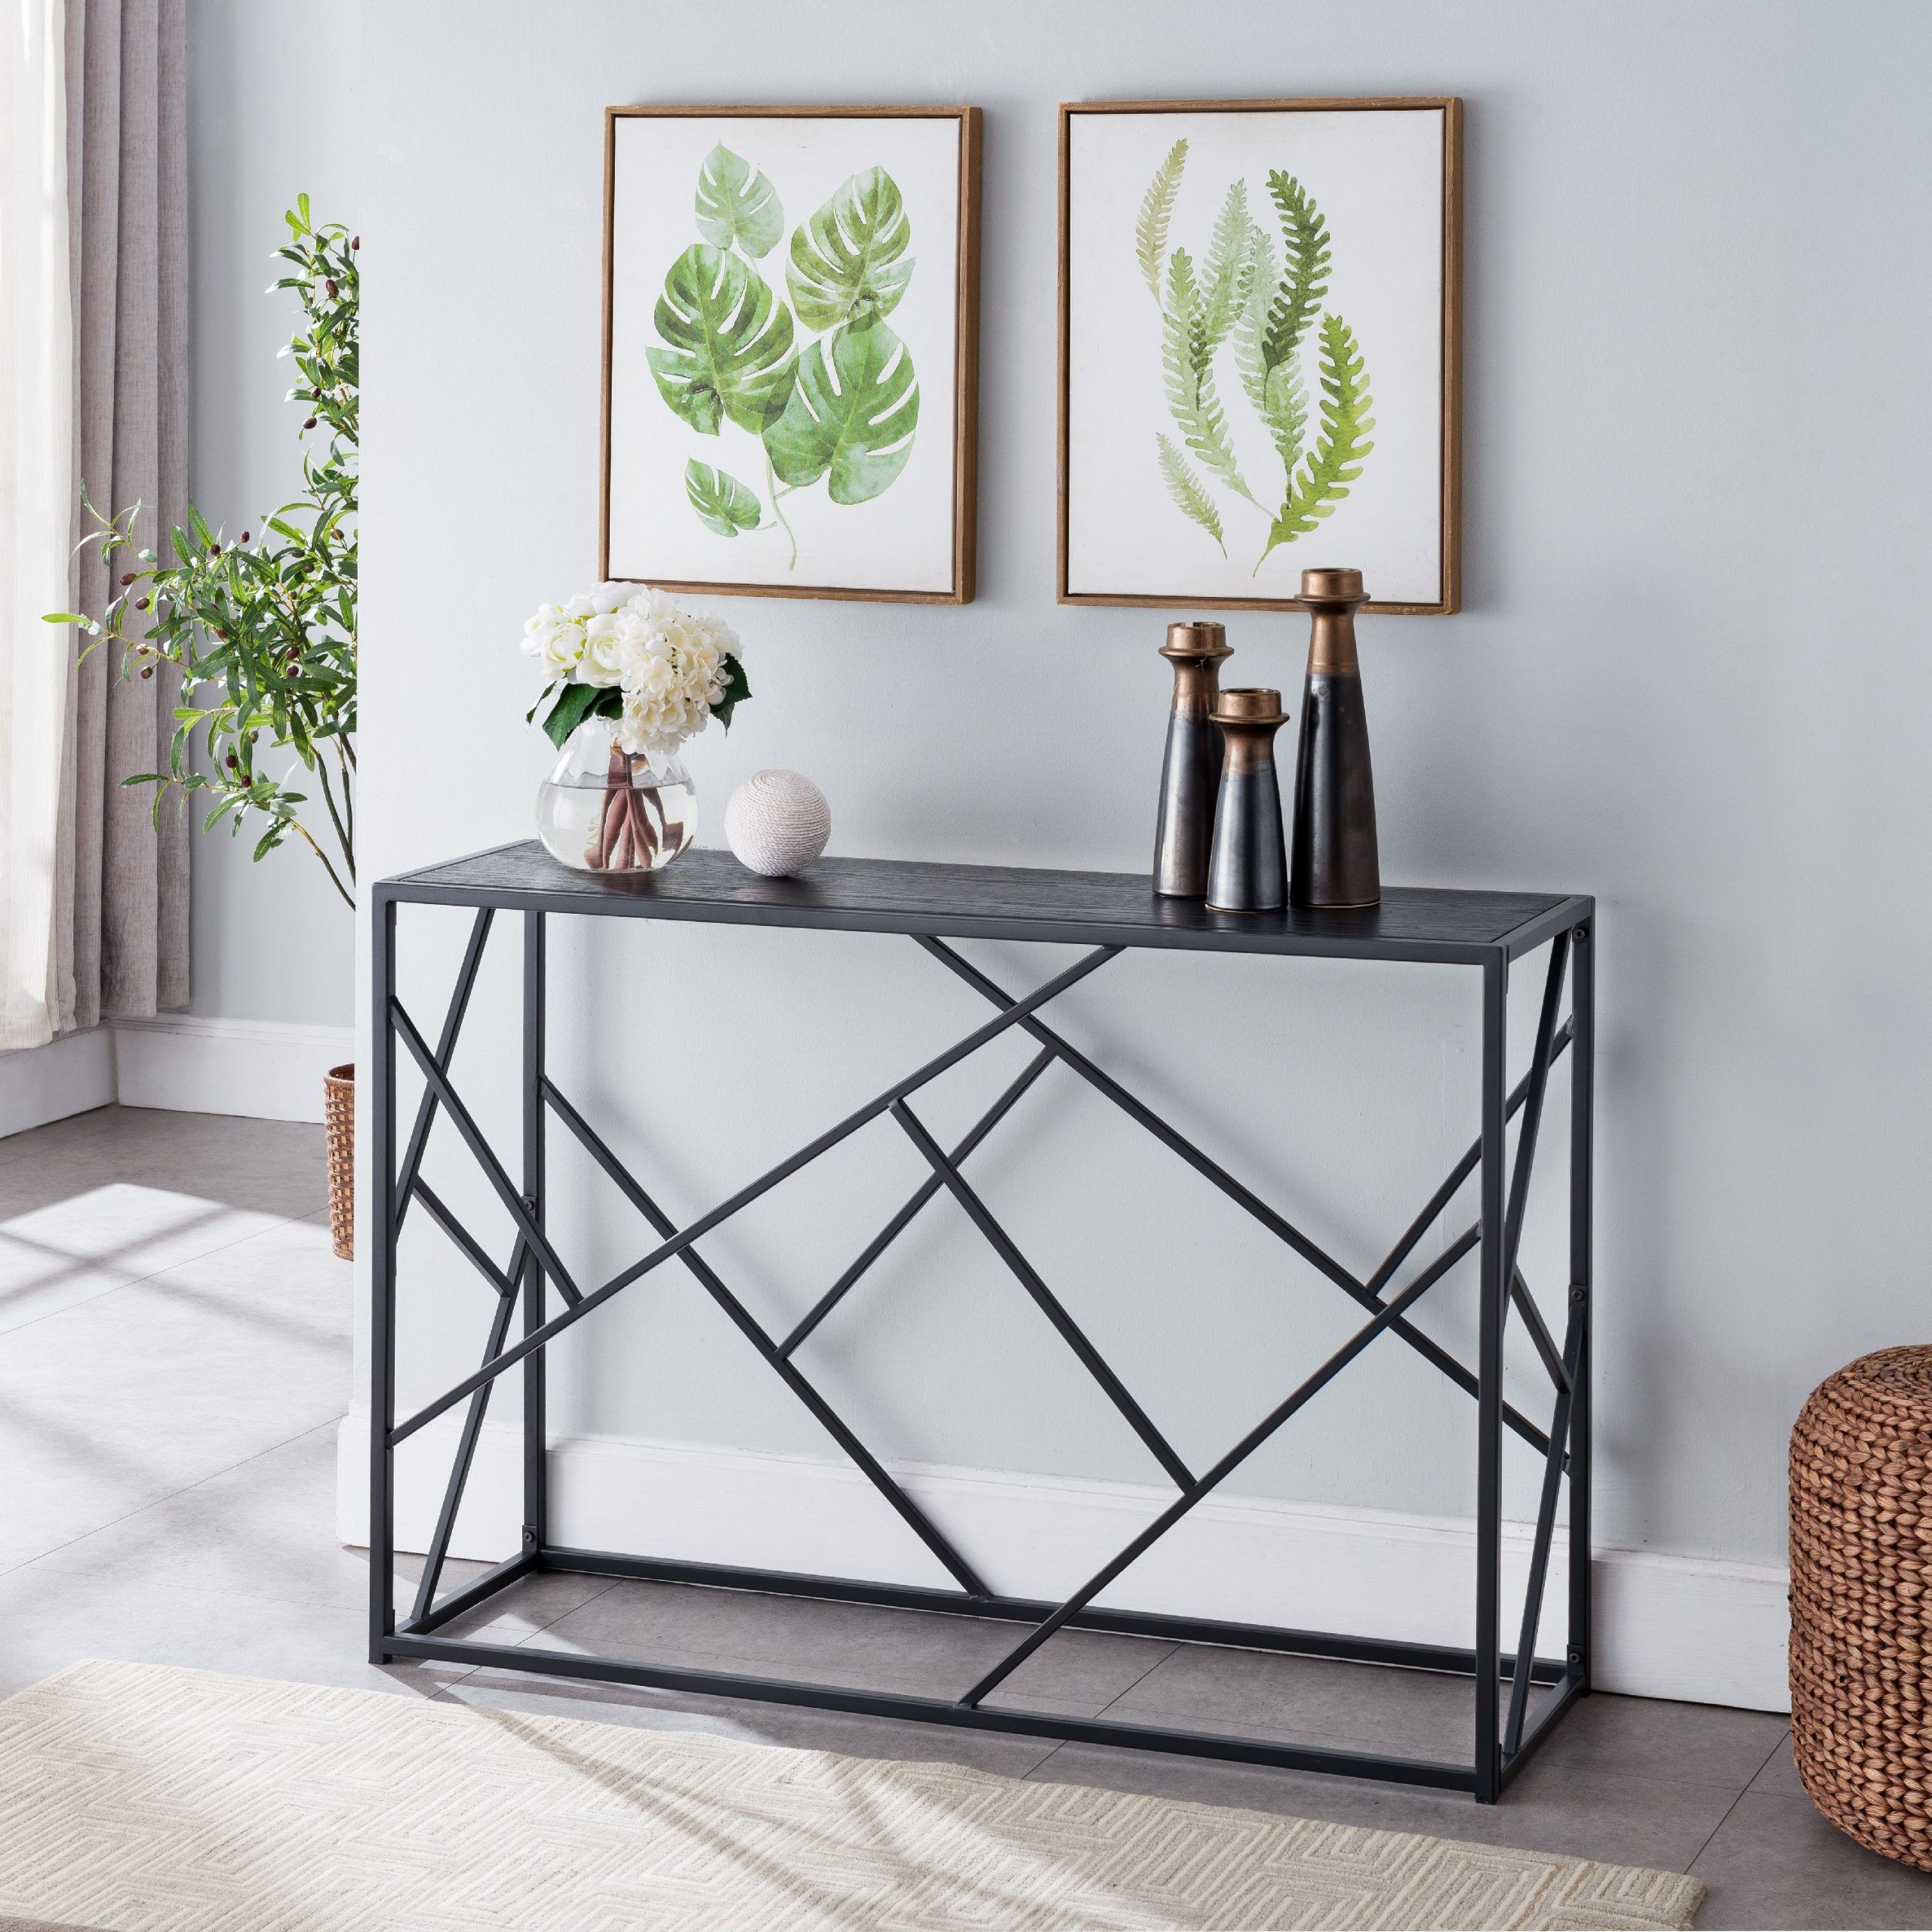 Thurl Modern Entryway Console Sofa Table, Black Metal Frame & Gray Wood Inside Square Modern Console Tables (View 1 of 20)